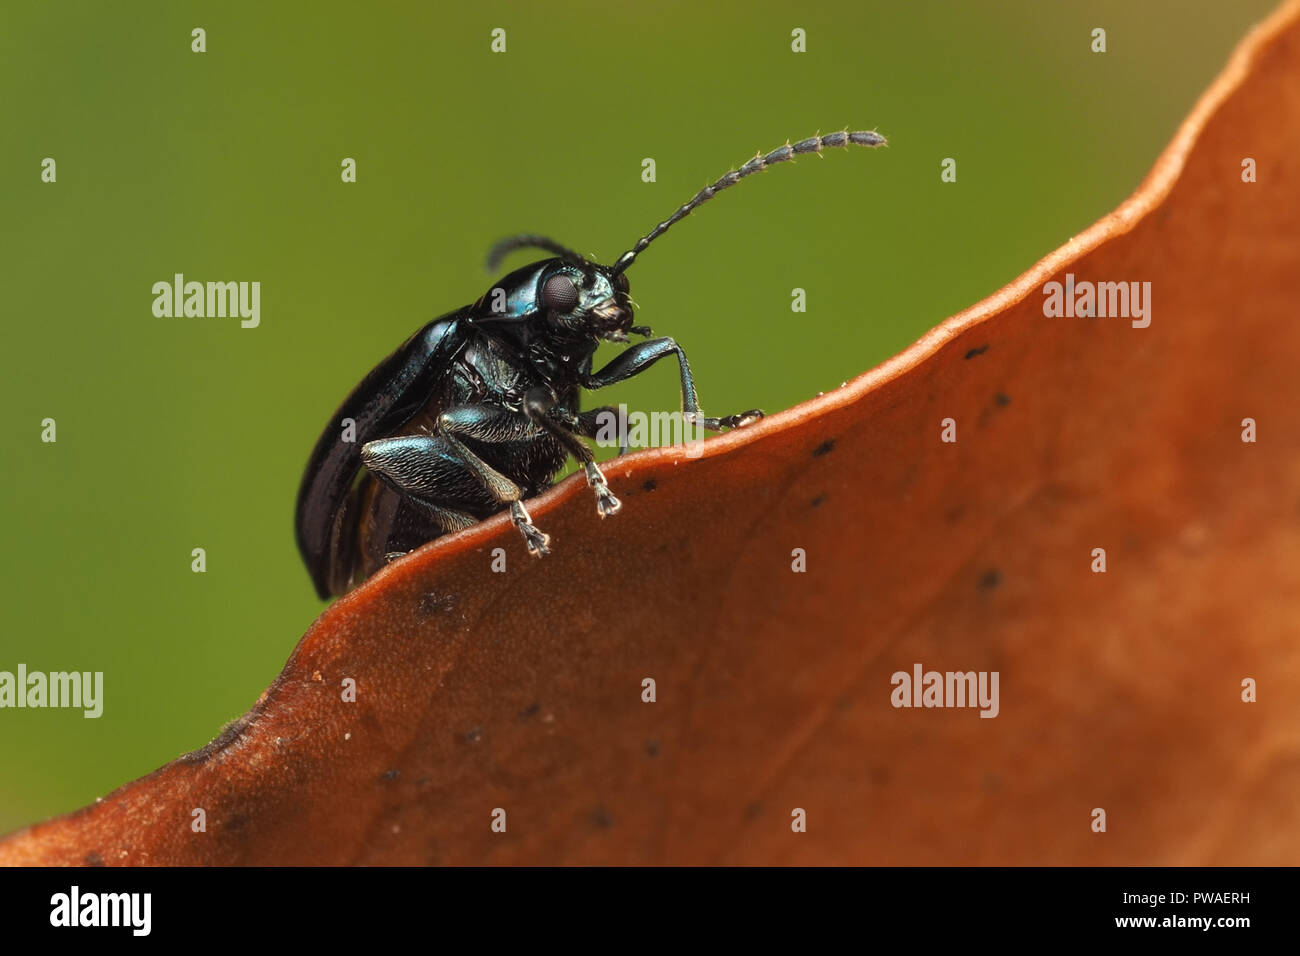 Flea Beetle perched on dead leaf. Tipperary, Ireland Stock Photo